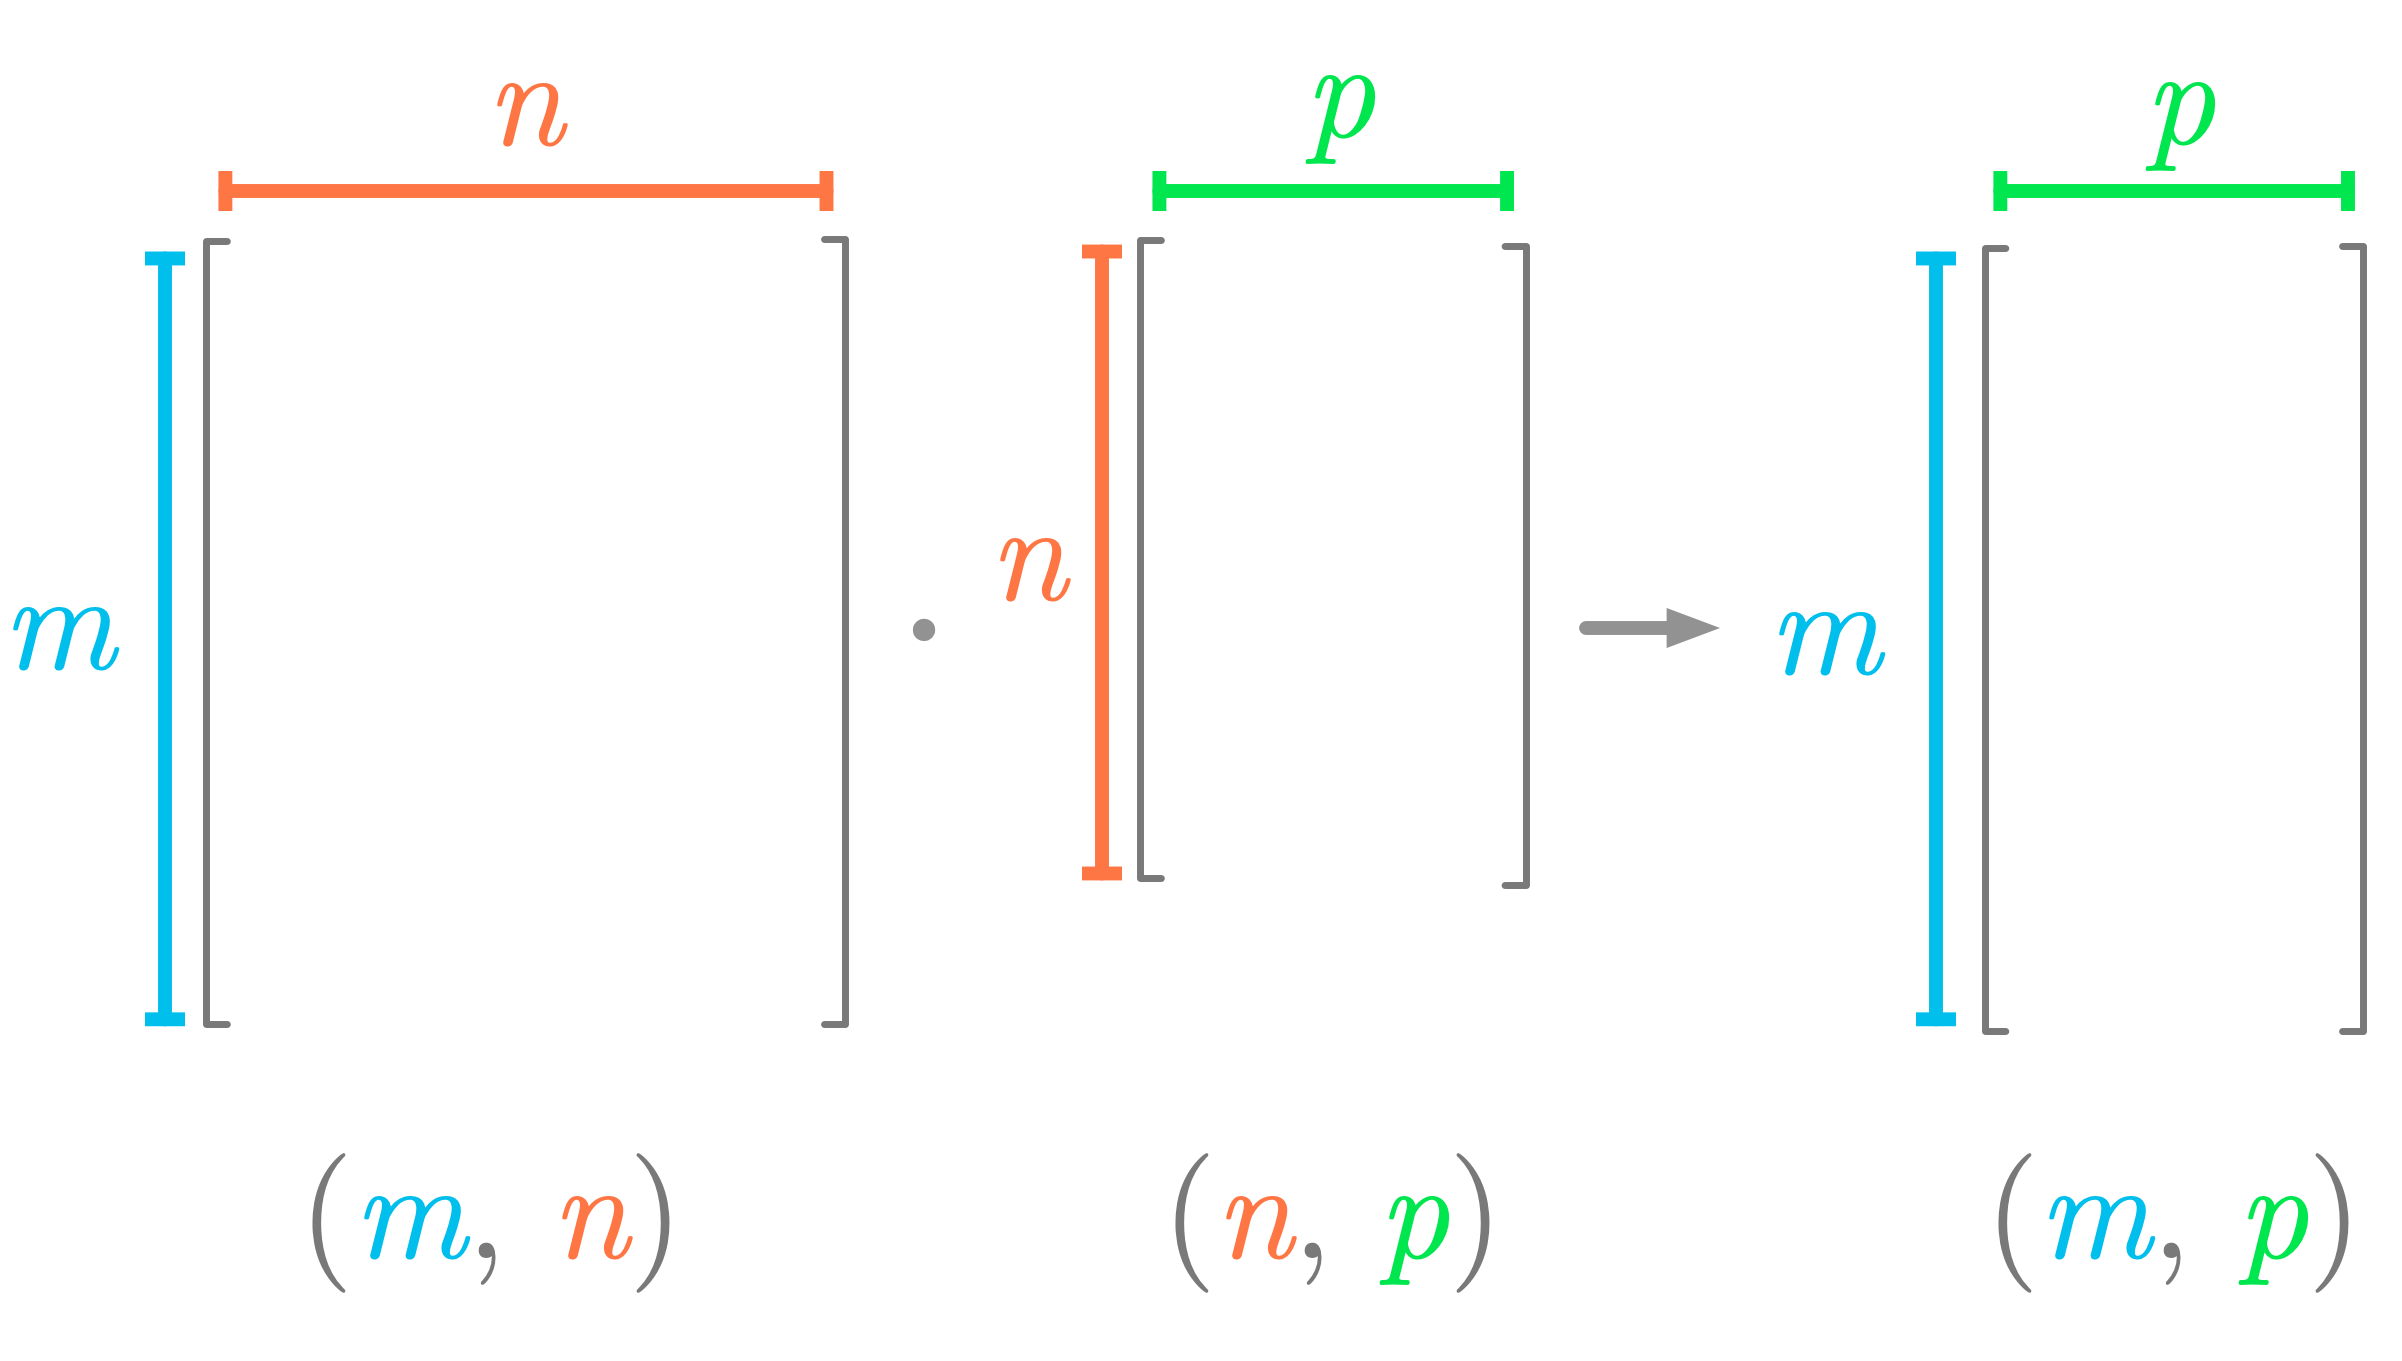 Figure 6: Shapes must match for the dot product between two matrices.